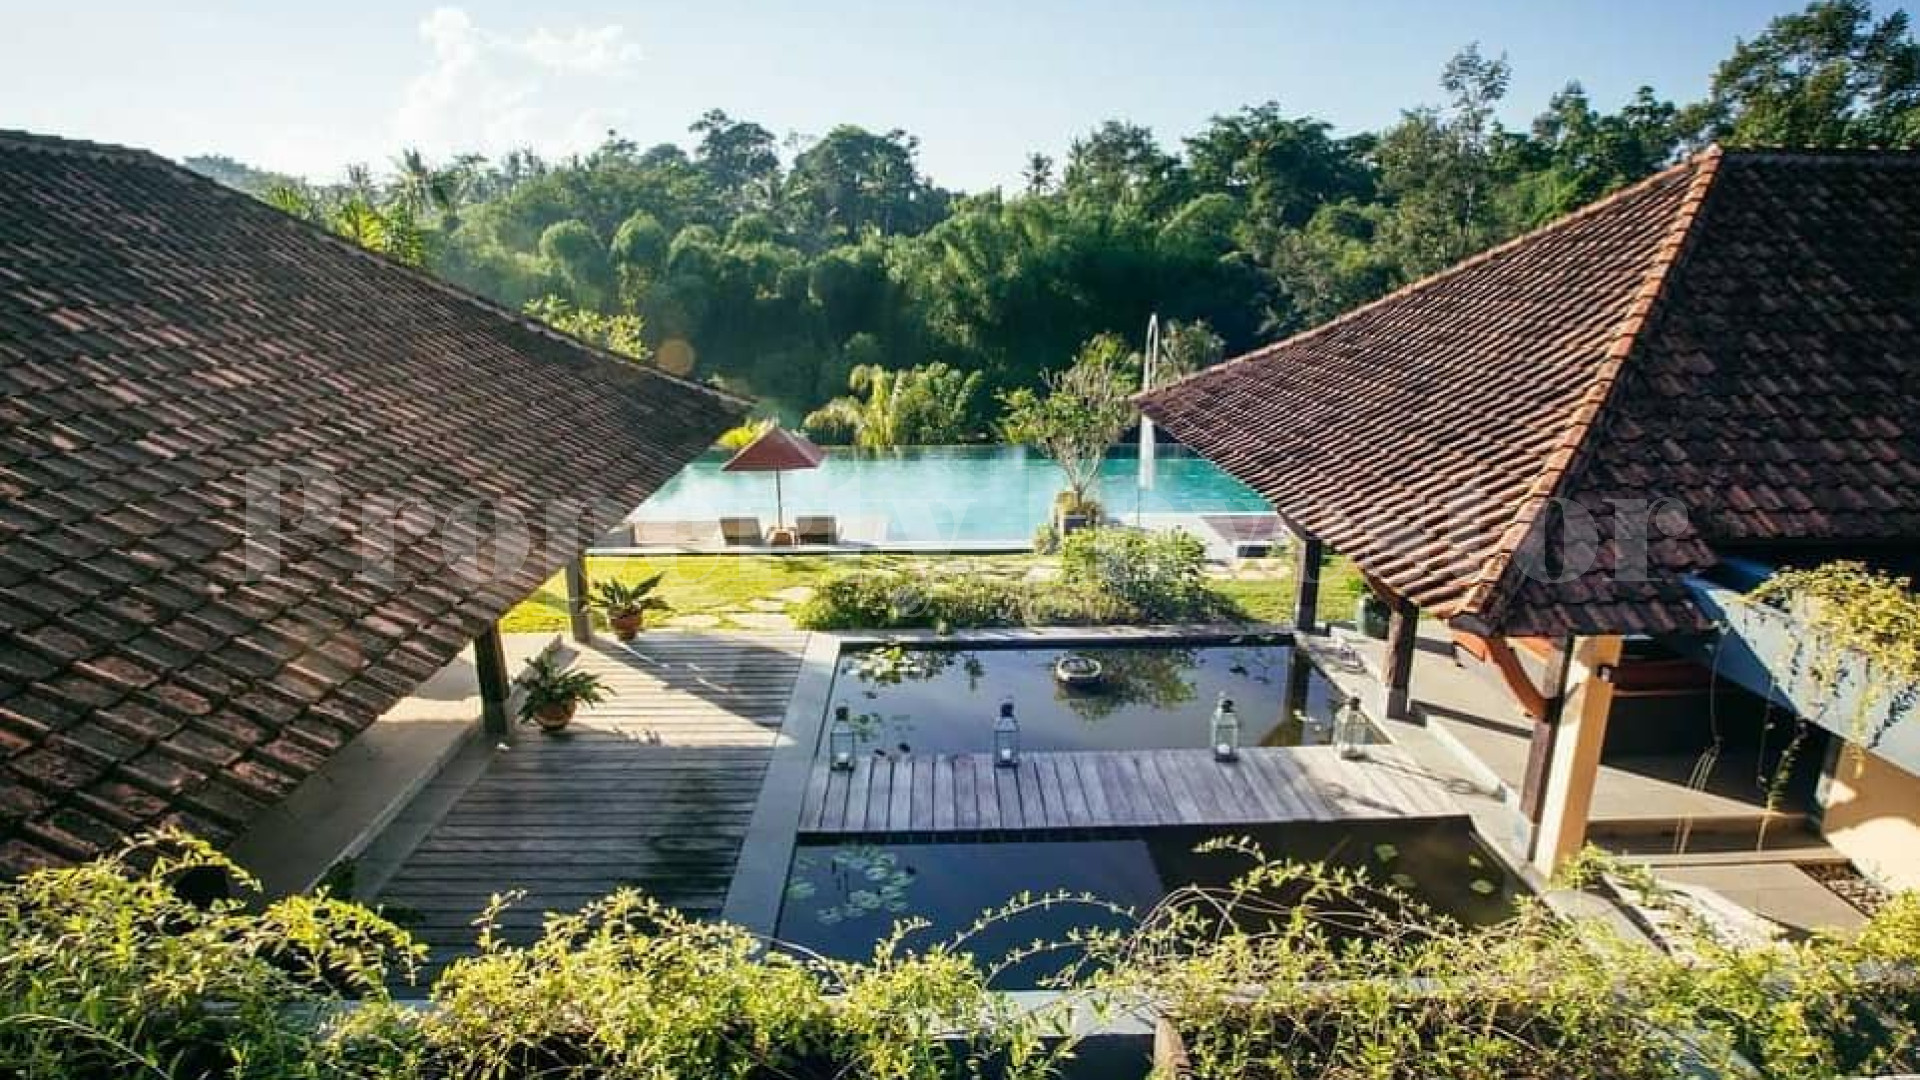 Magnificent 7 Bedroom Luxury Gated Community Estate with Horse Stables for Sale in Tabanan, Bali